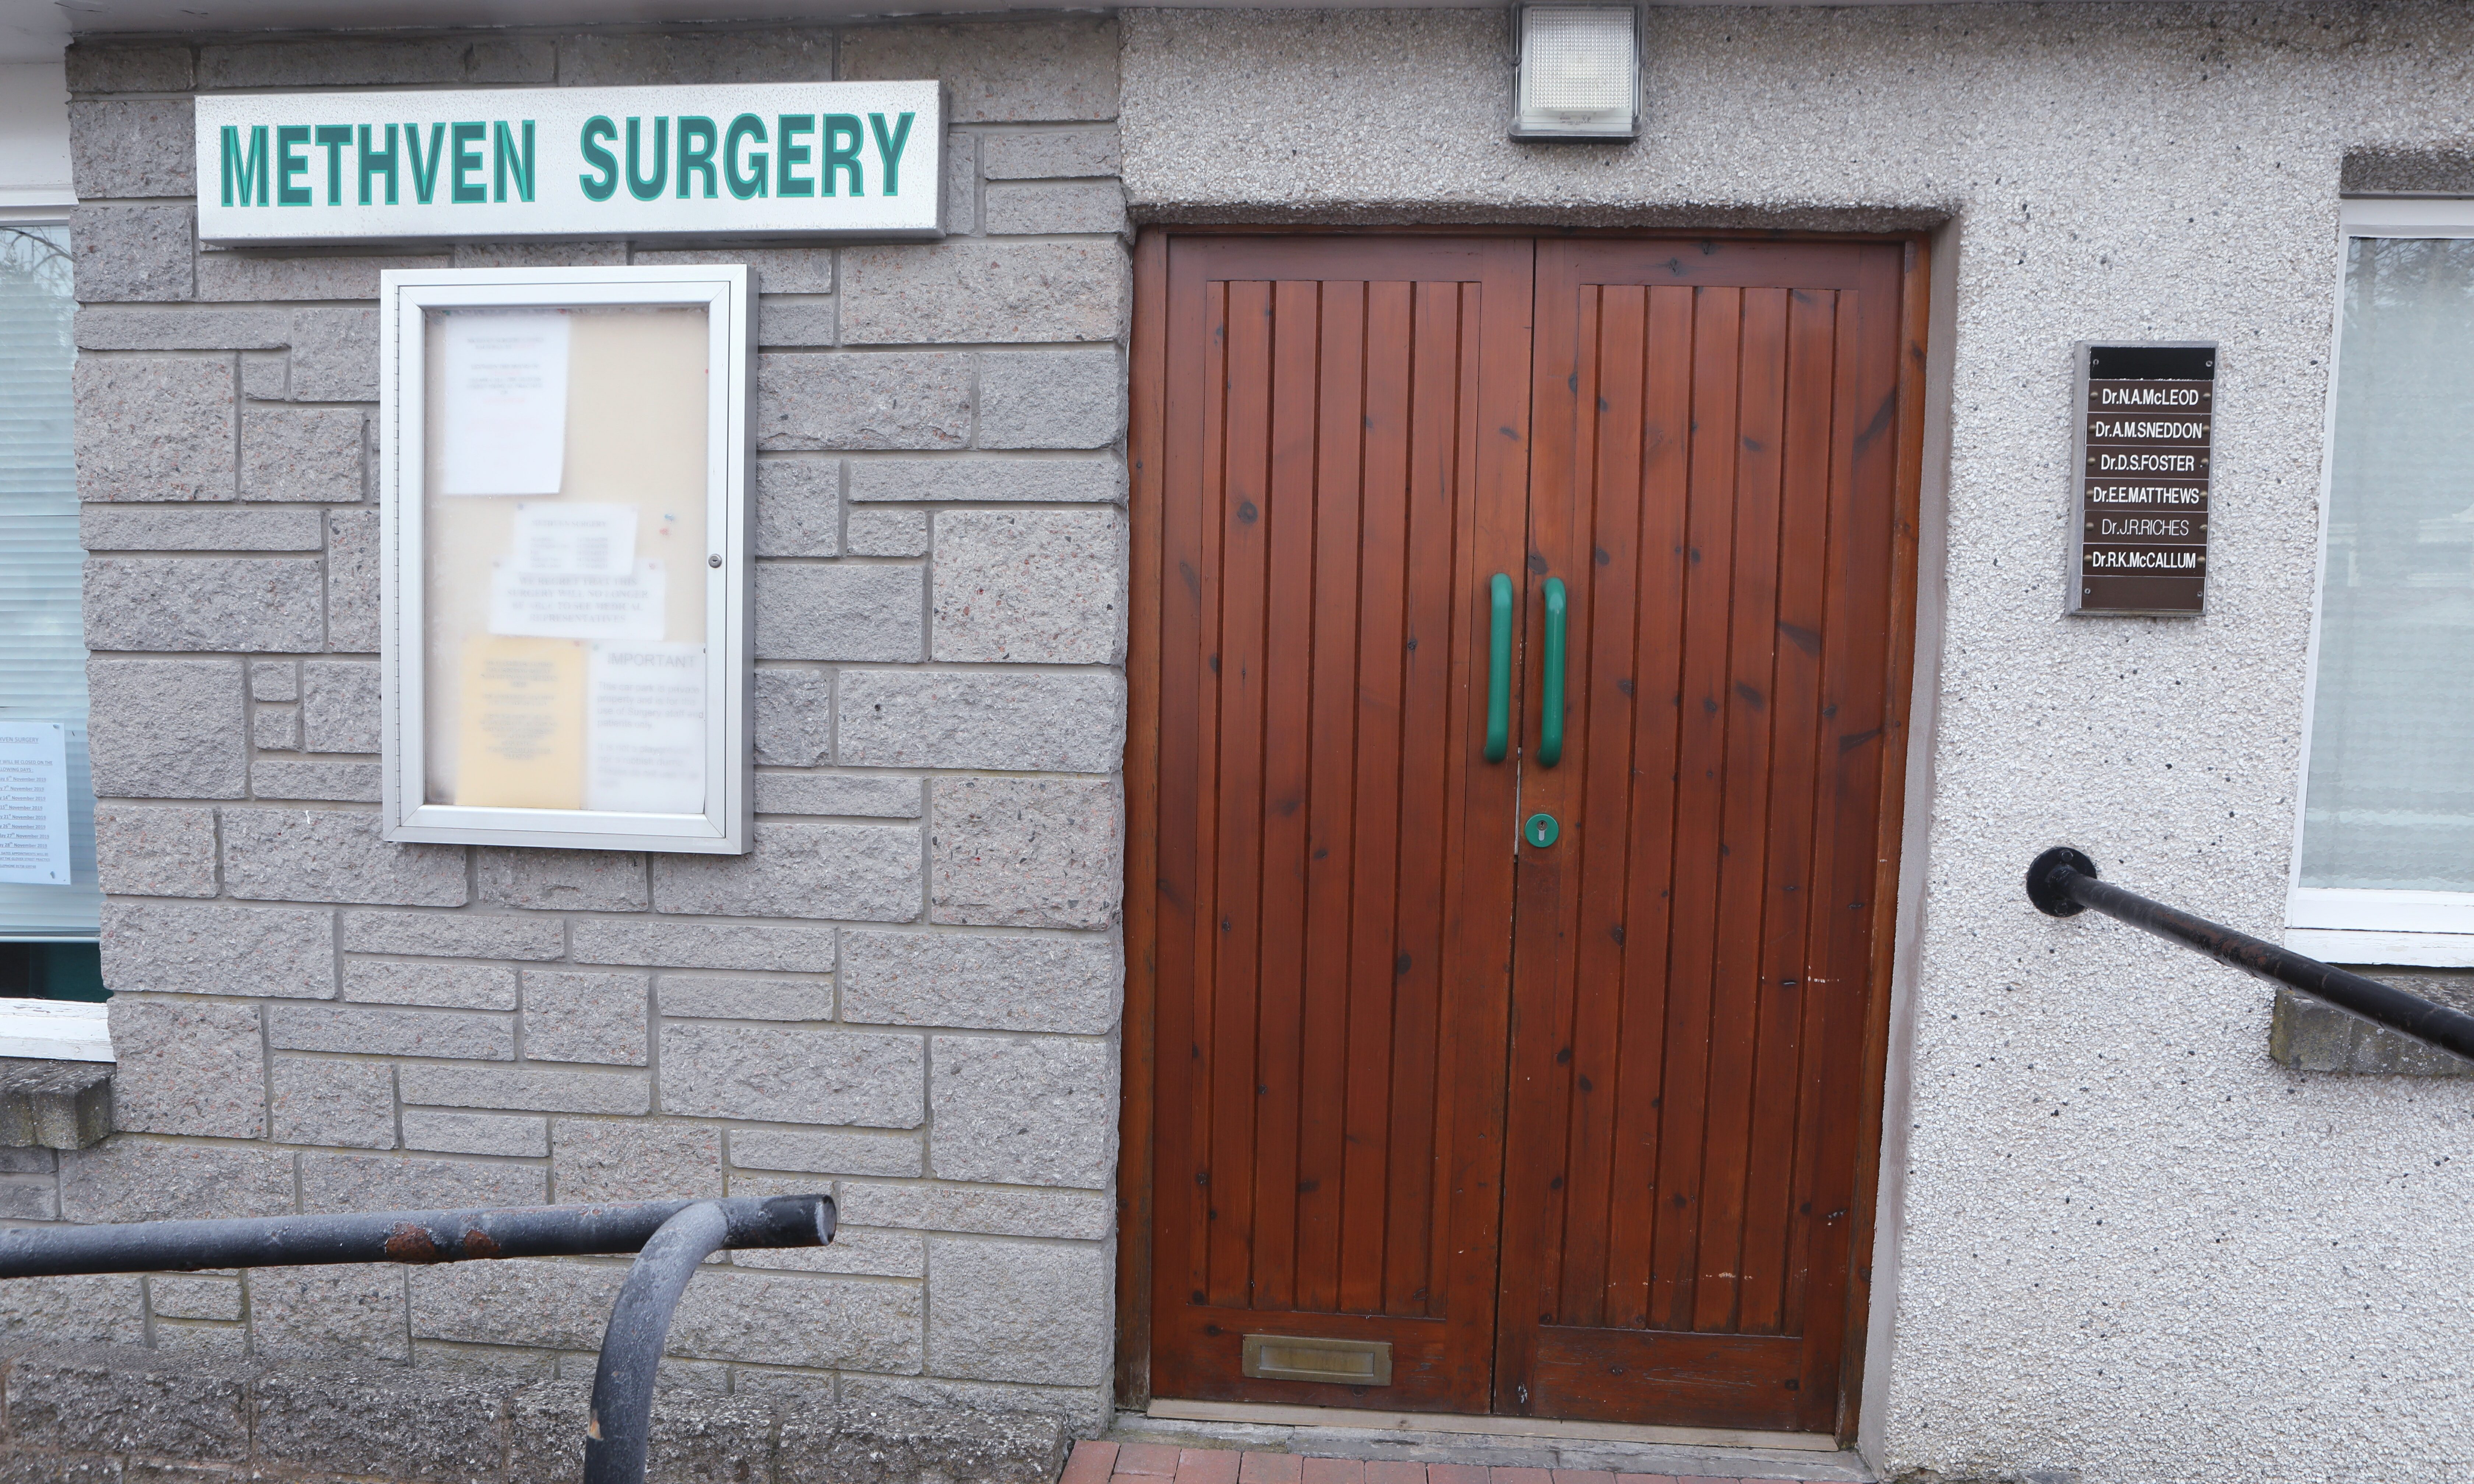 Residents have reported that Methevn surgery has been repeatedly closed on weekdays.